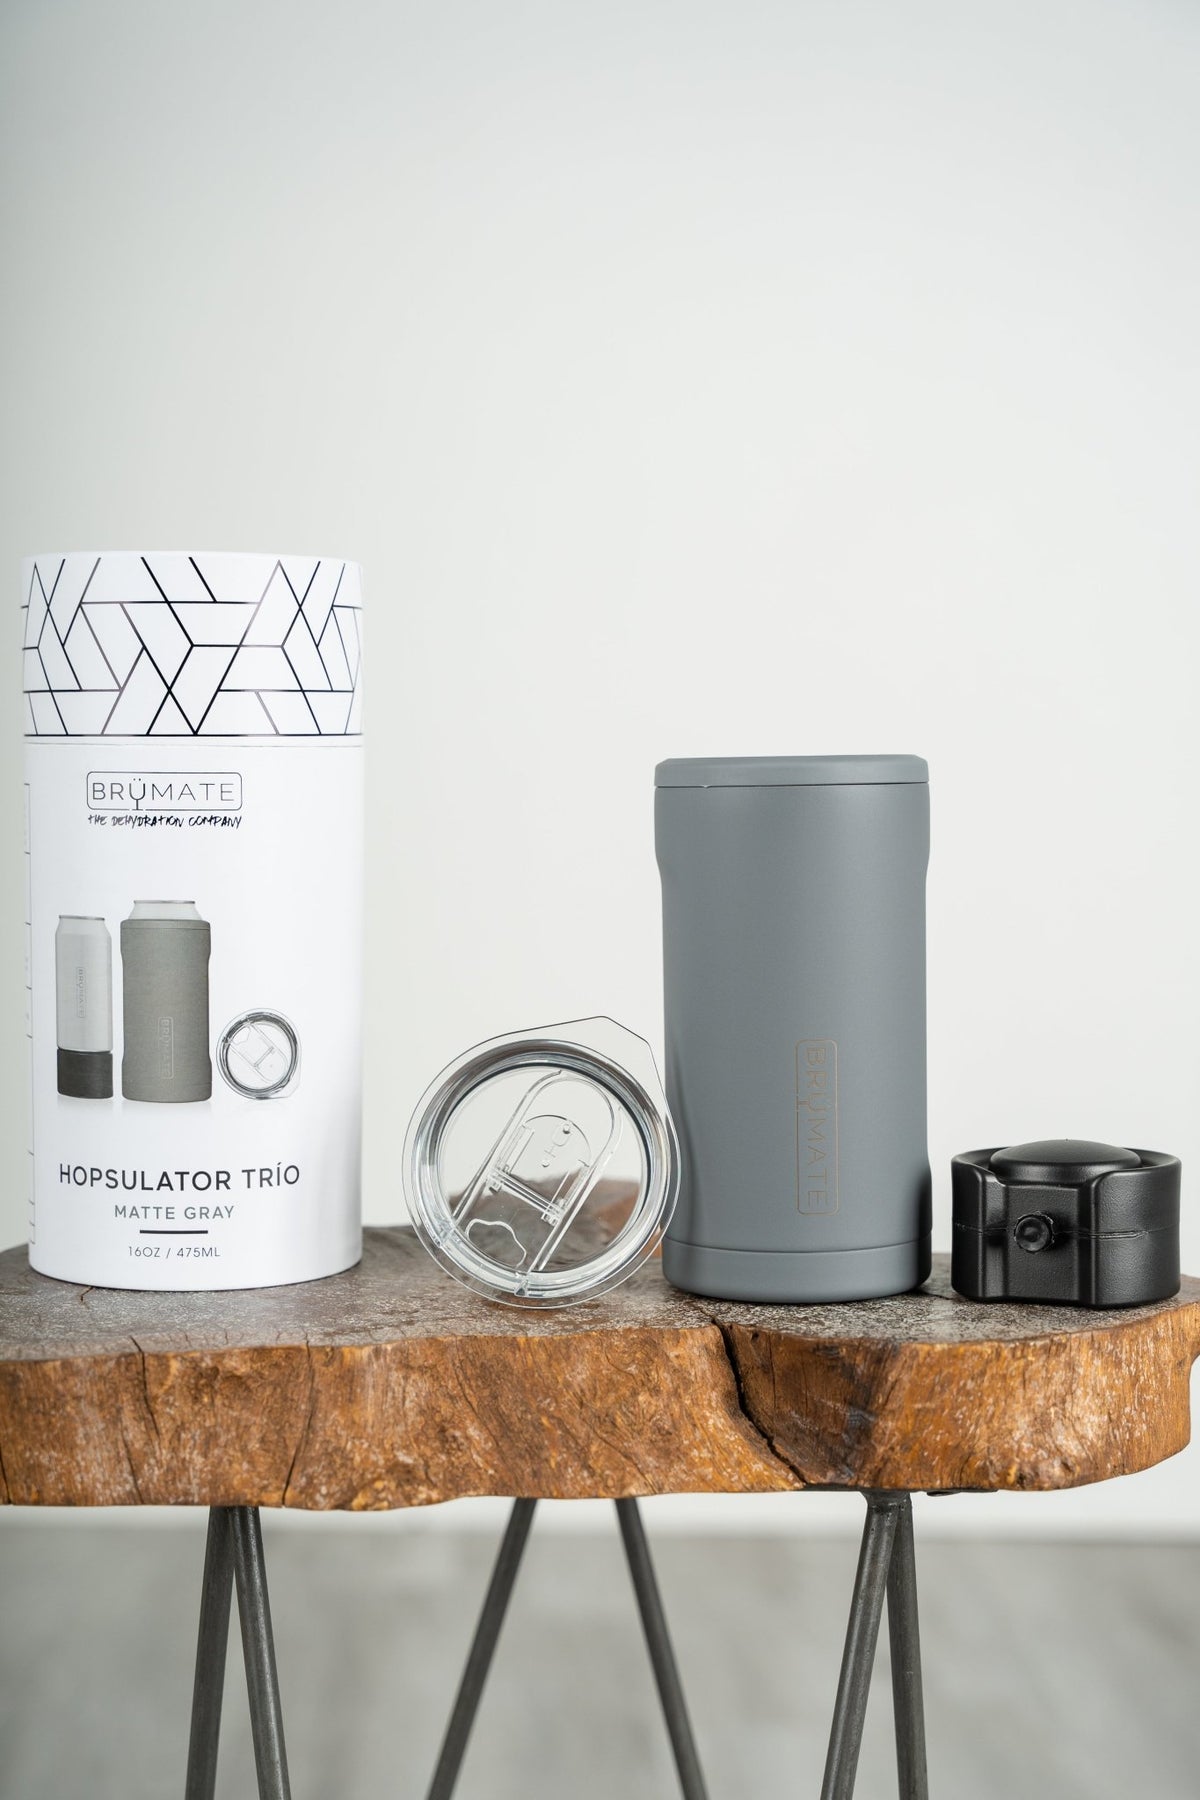 BruMate hopsulator trio 3 in 1 matte grey - BruMate Drinkware, Tumblers and Insulated Can Coolers at Lush Fashion Lounge Trendy Boutique in Oklahoma City